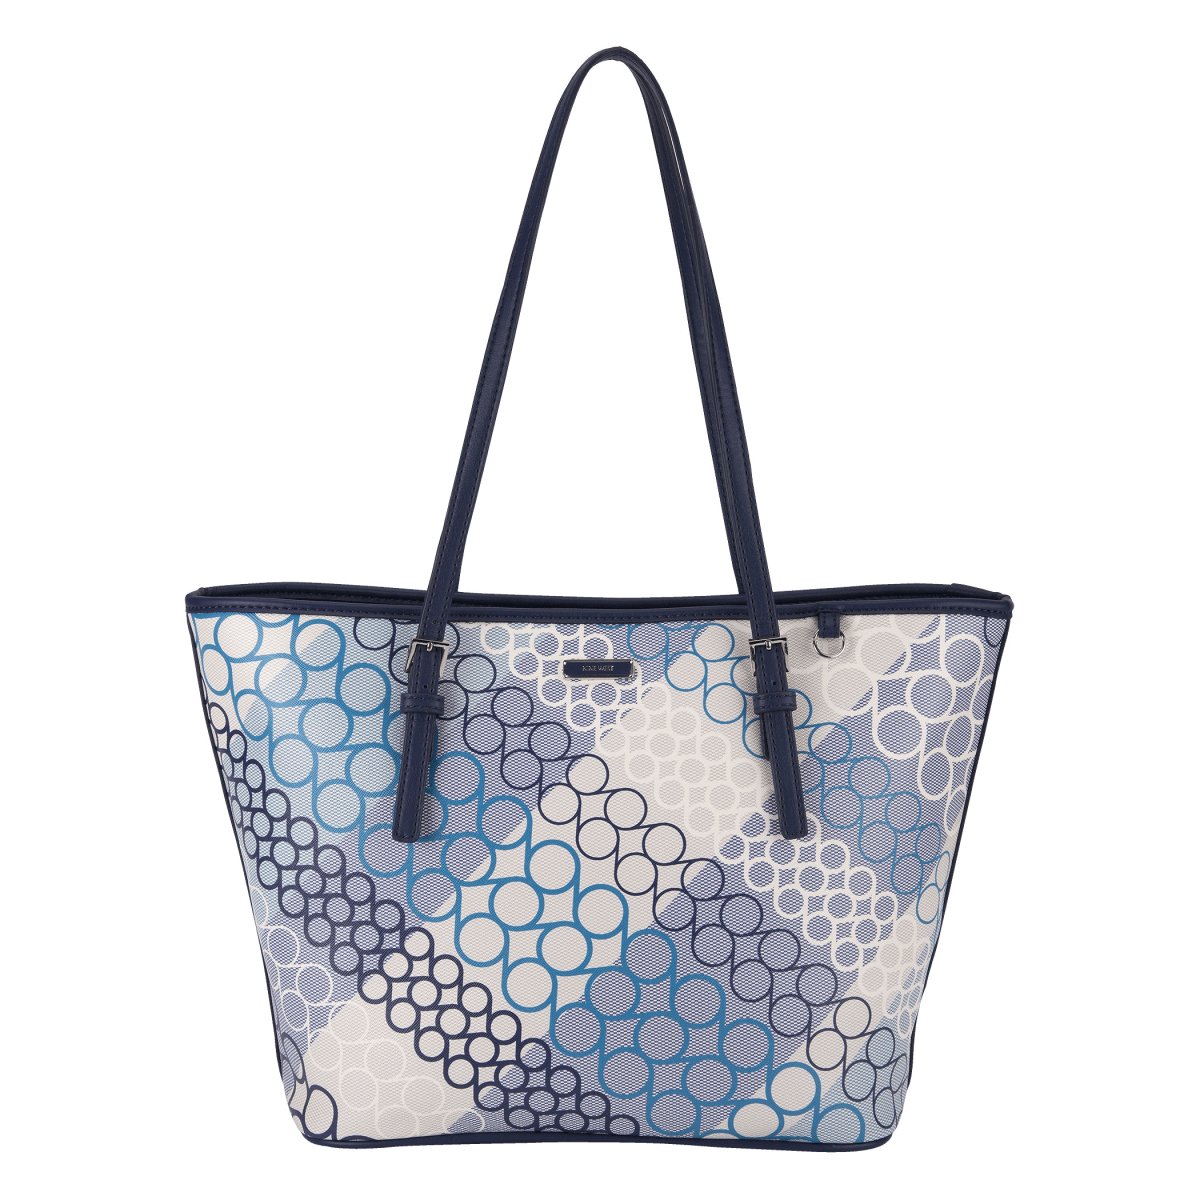 Bolso Tote Nine West Tote F16 09/16 Hb60388064-H36